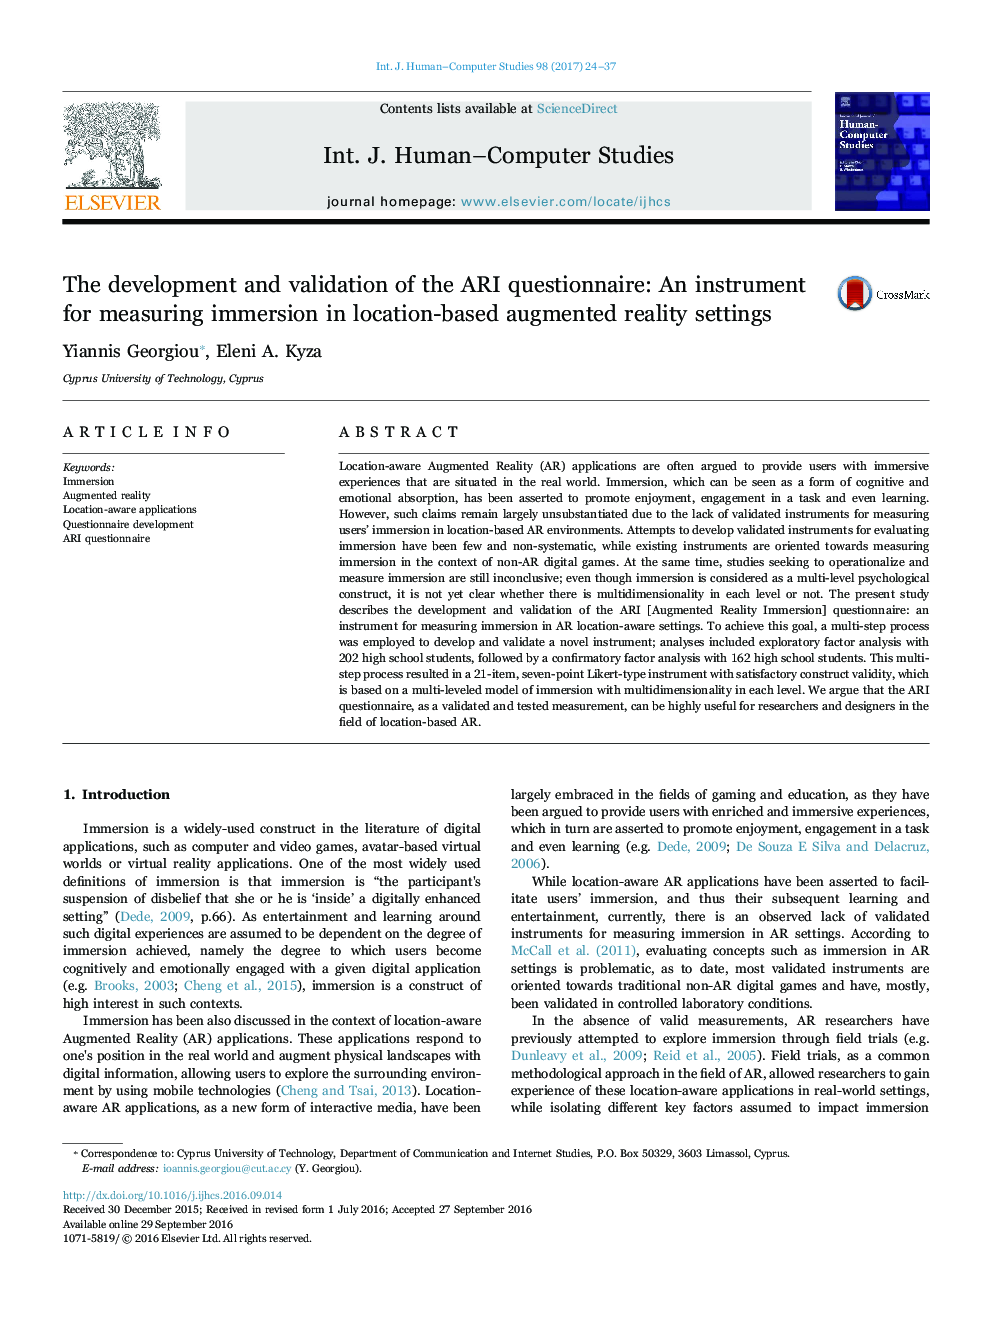 The development and validation of the ARI questionnaire: An instrument for measuring immersion in location-based augmented reality settings